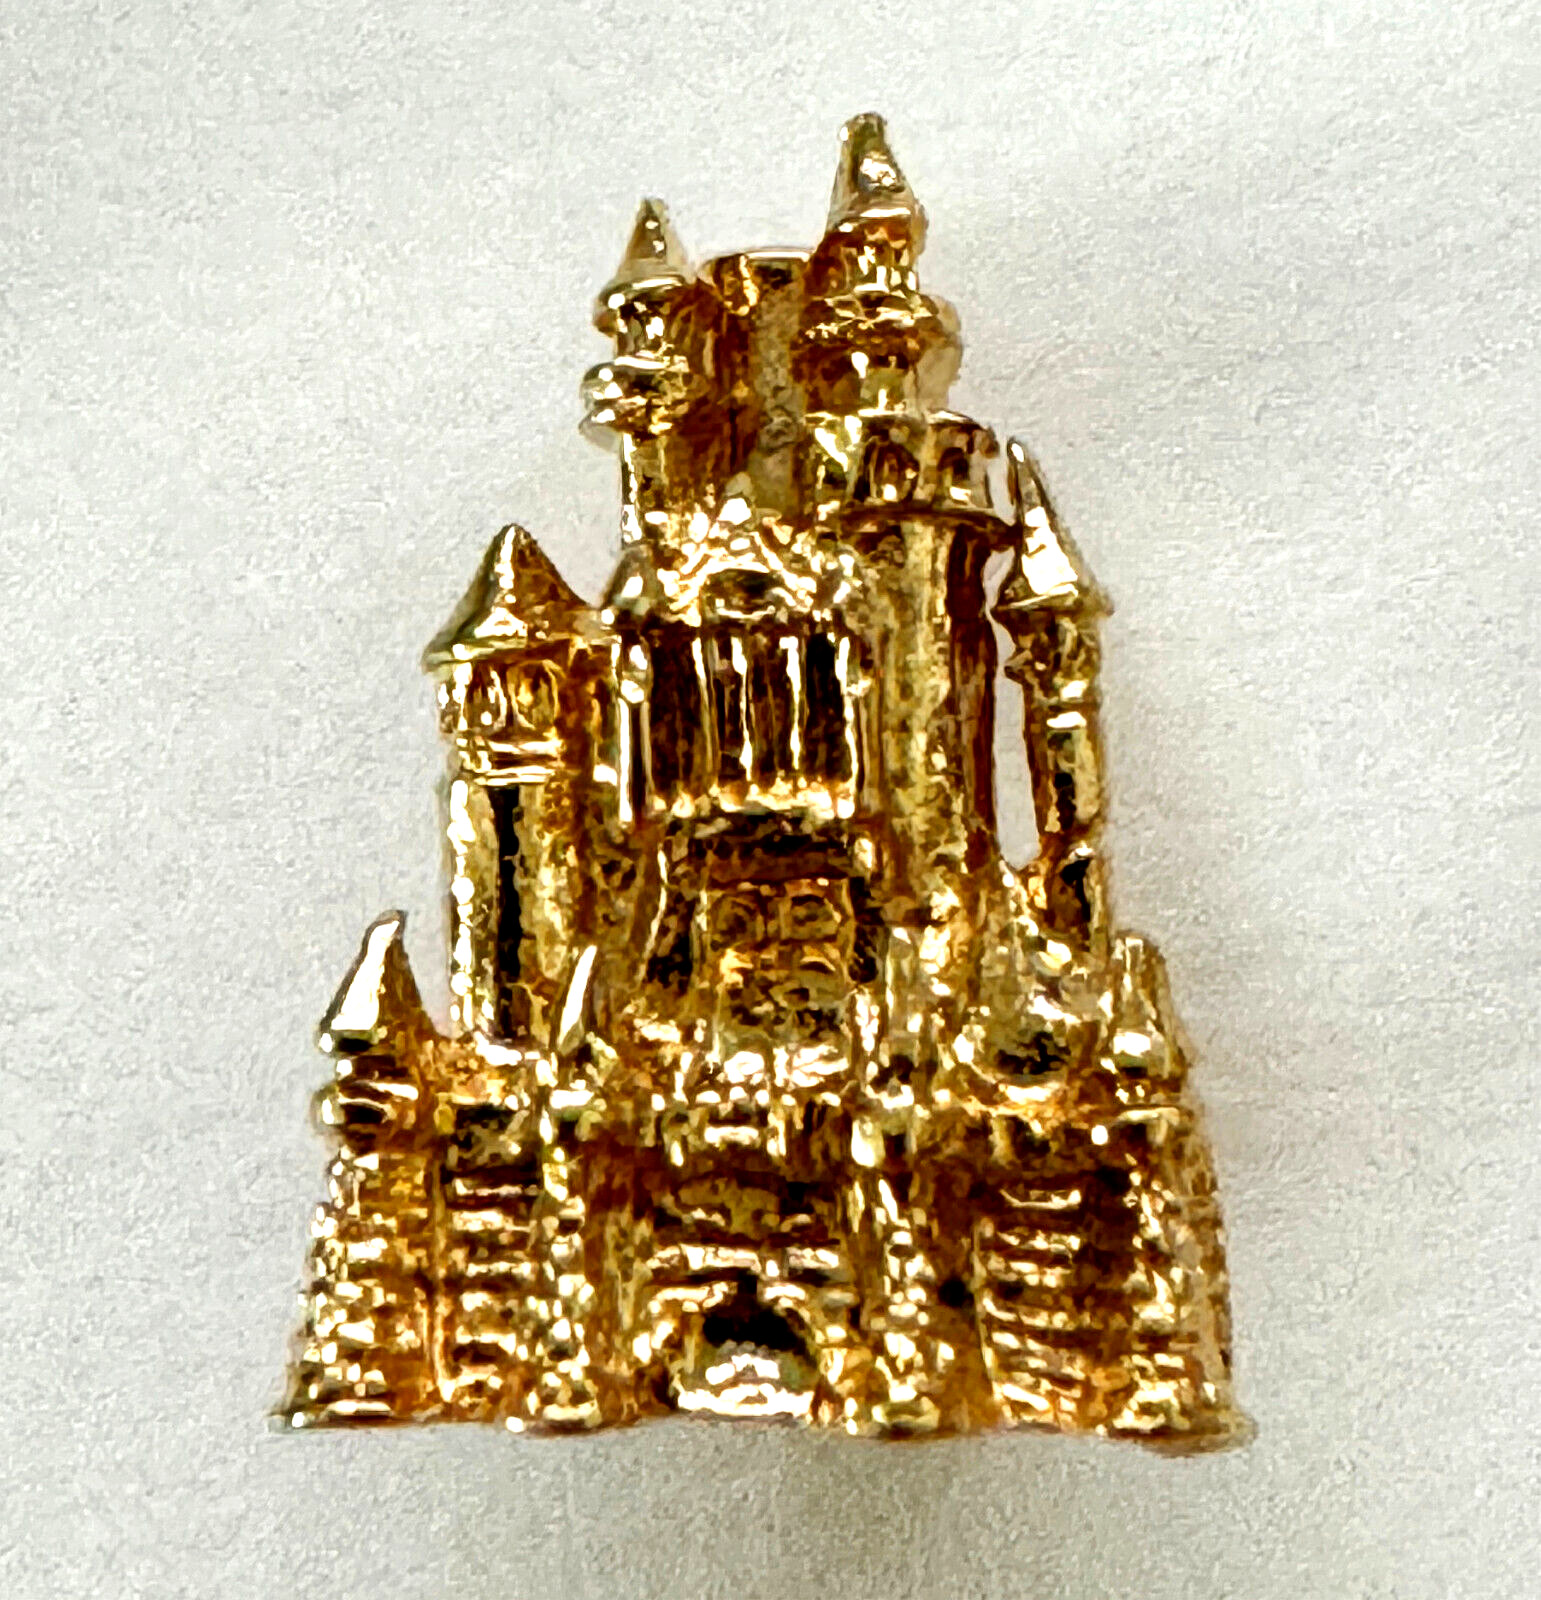 Vintage Disneyland Tour Guide Gold-Tone Castle Pin for Hat circa early 1980s